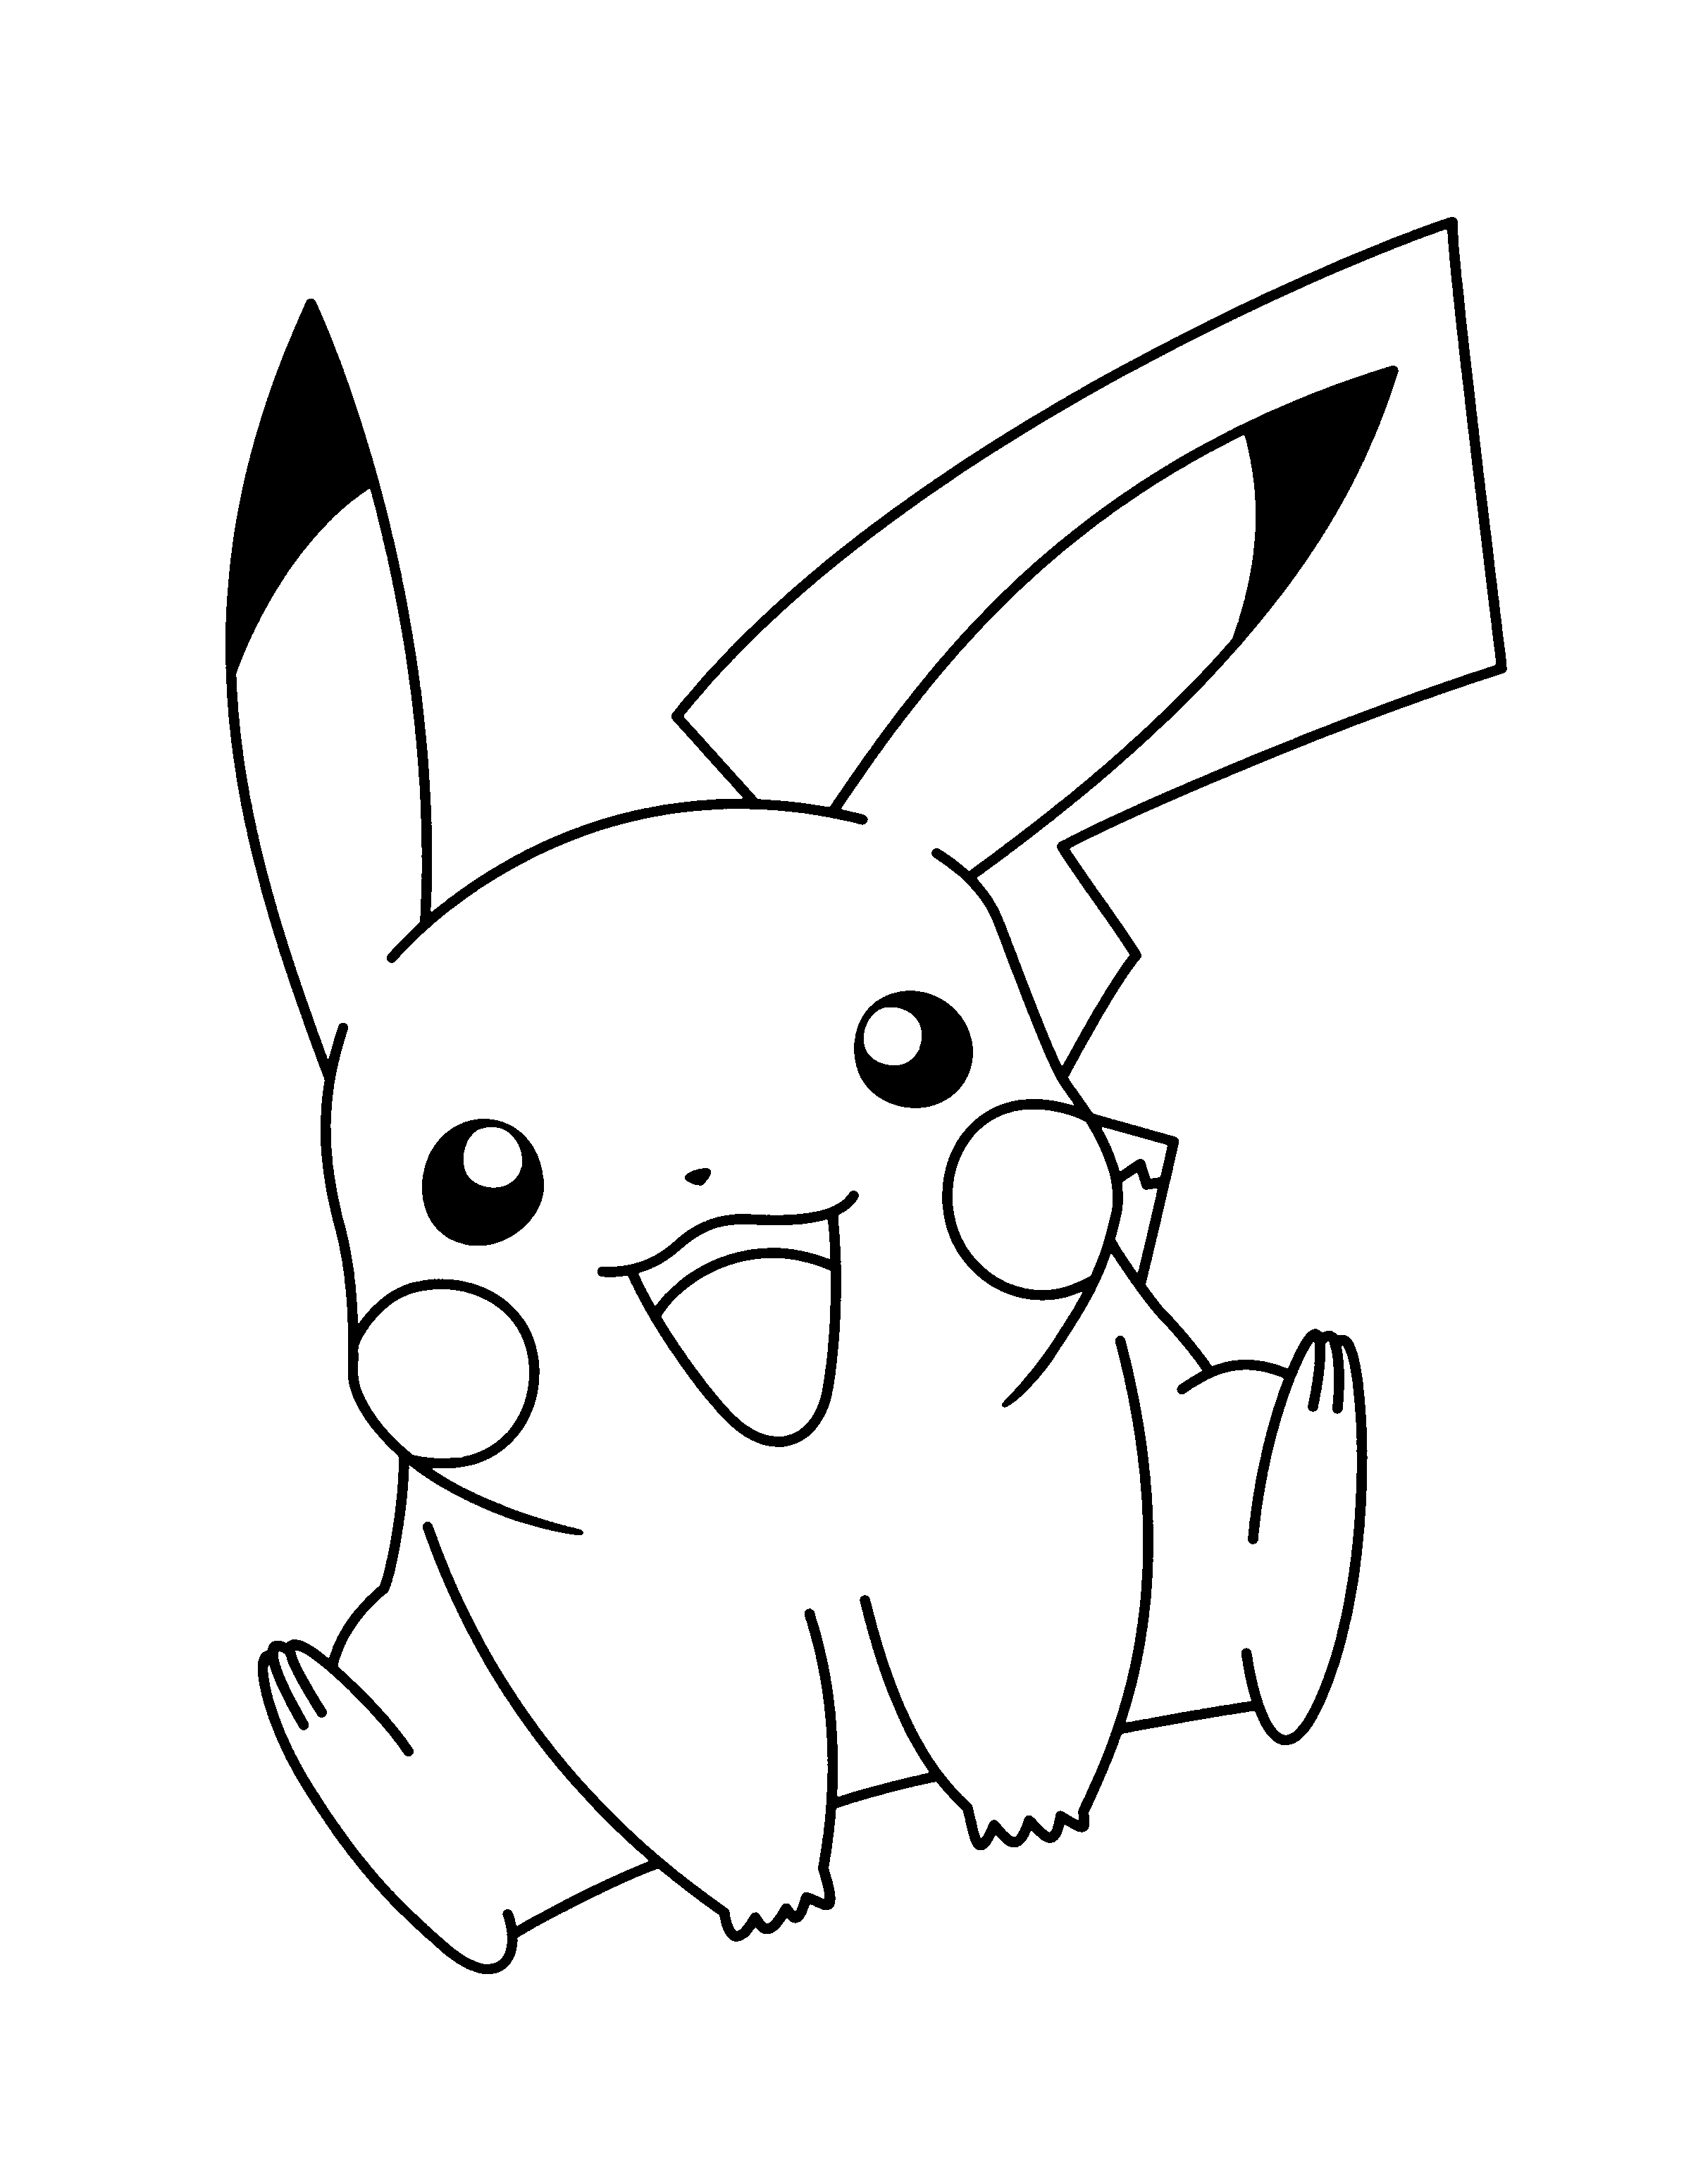 Coloring Page Pokemon Advanced Coloring Pages 213 Pokemon Coloring Pikachu Coloring P